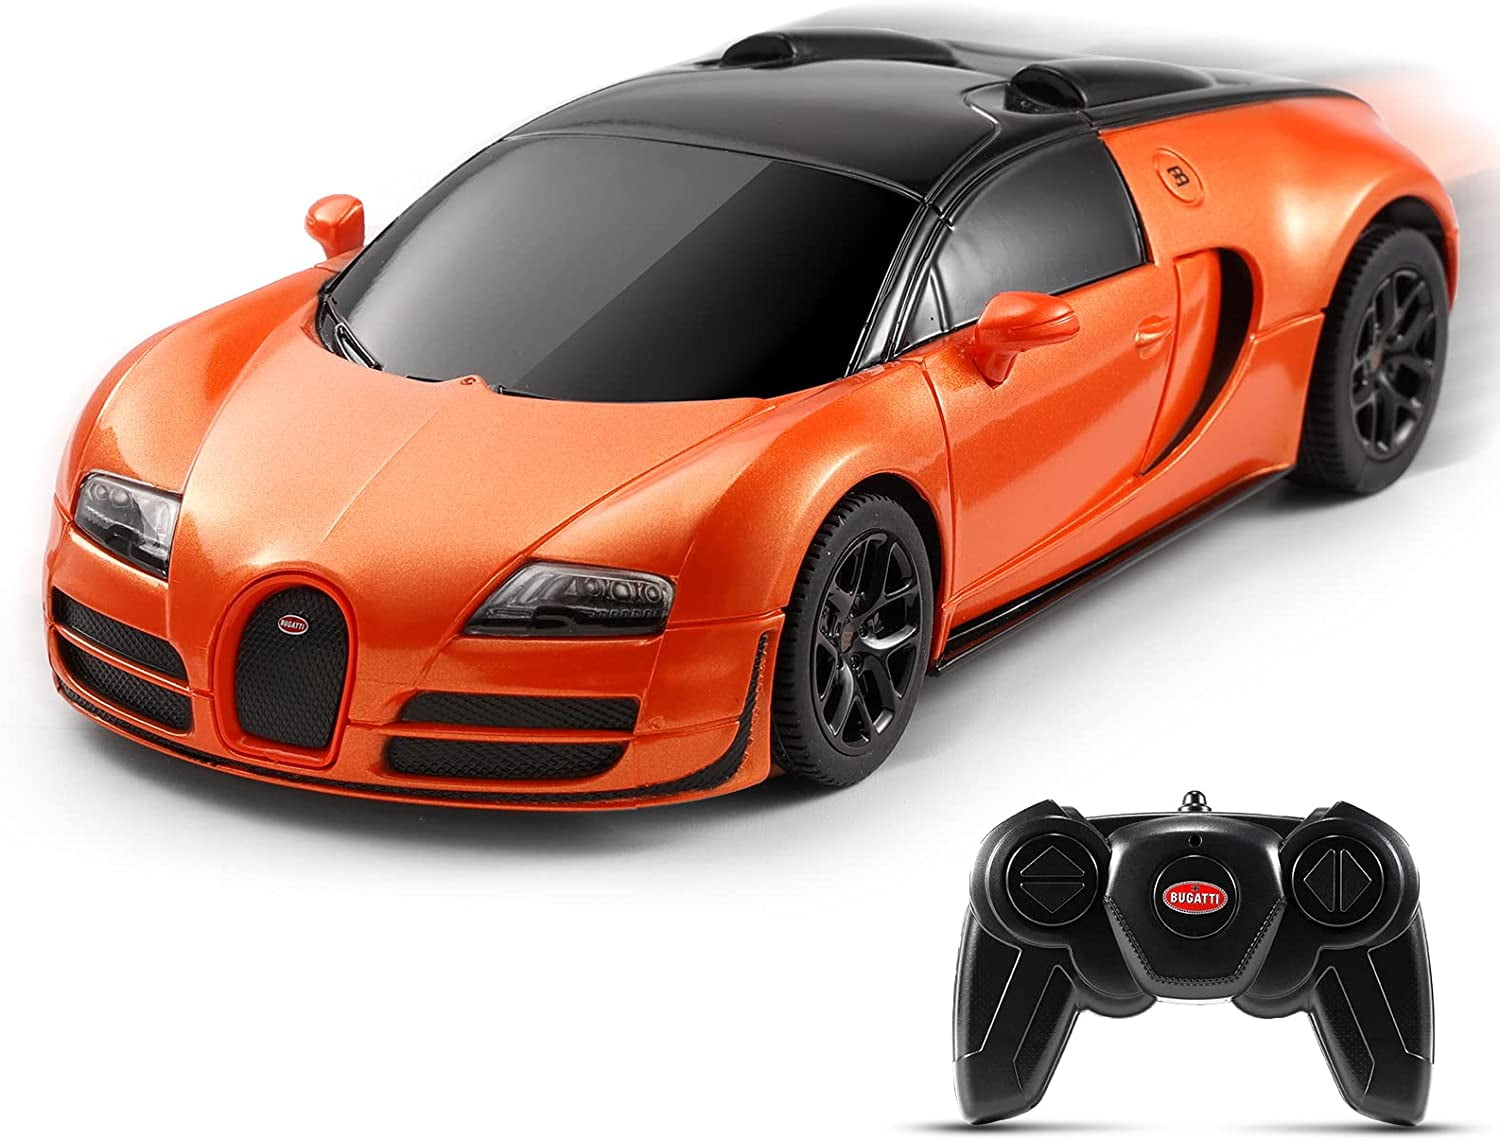 Rechargeable RC Bugatti Veyron Remote Control Opening Door Car Boys Fun Toy 